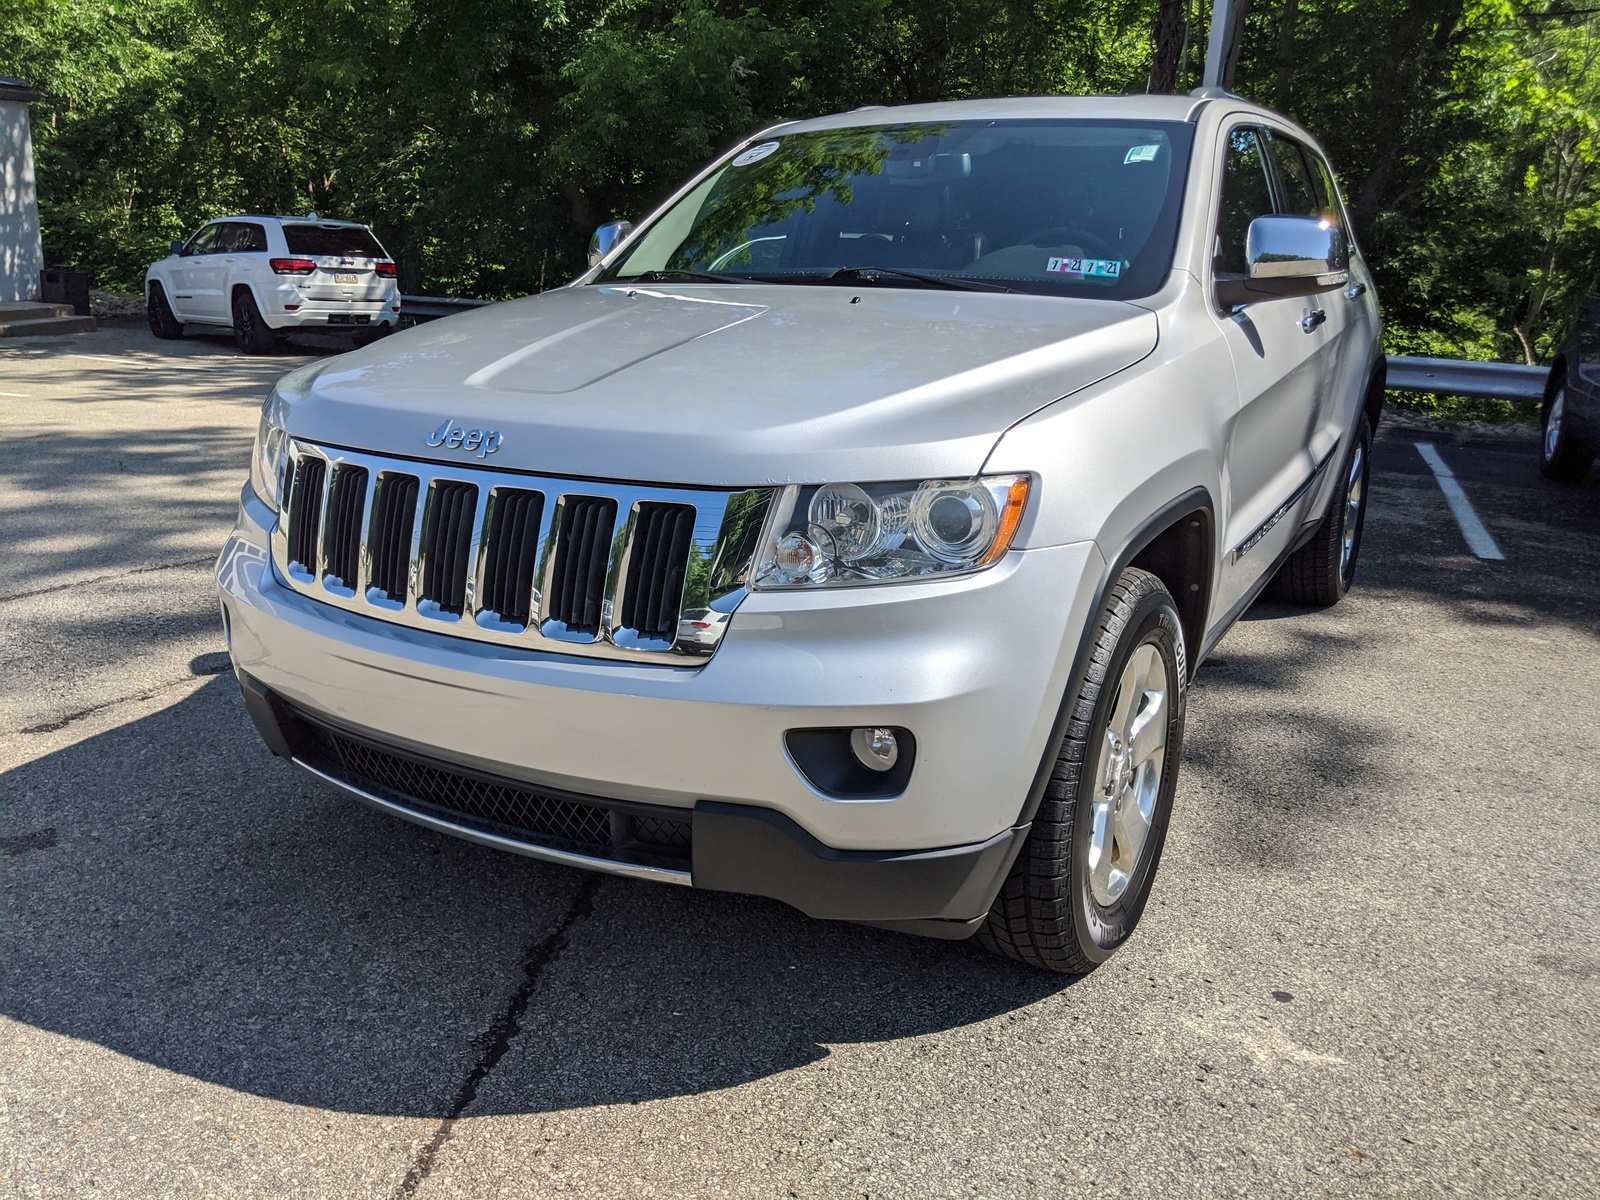 PreOwned 2012 Jeep Grand Cherokee Limited in Bright